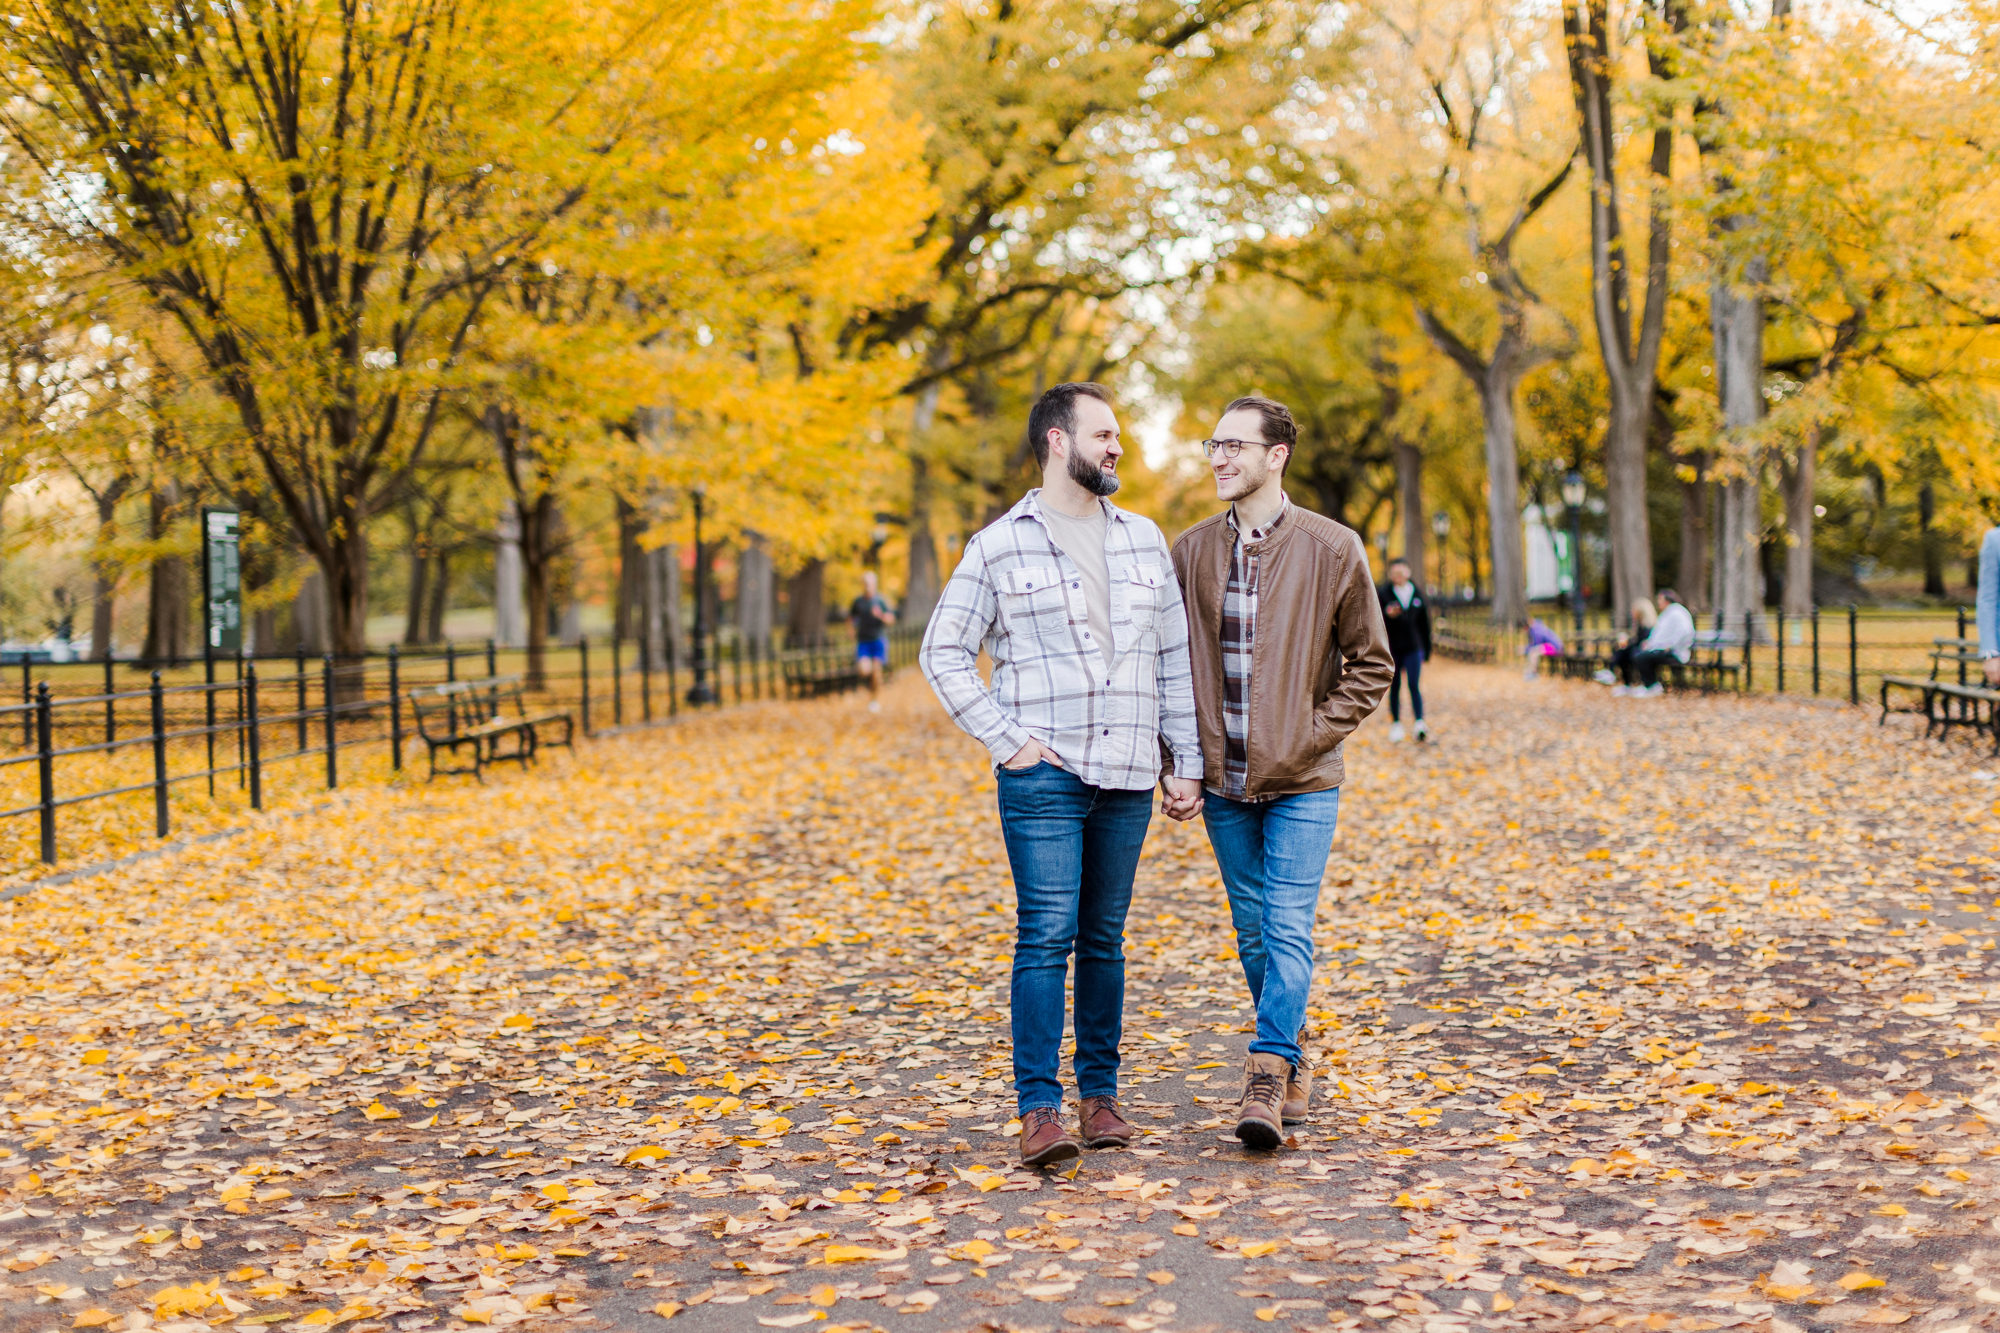 Fun-Filled Engagement Photo Shoot in Central Park